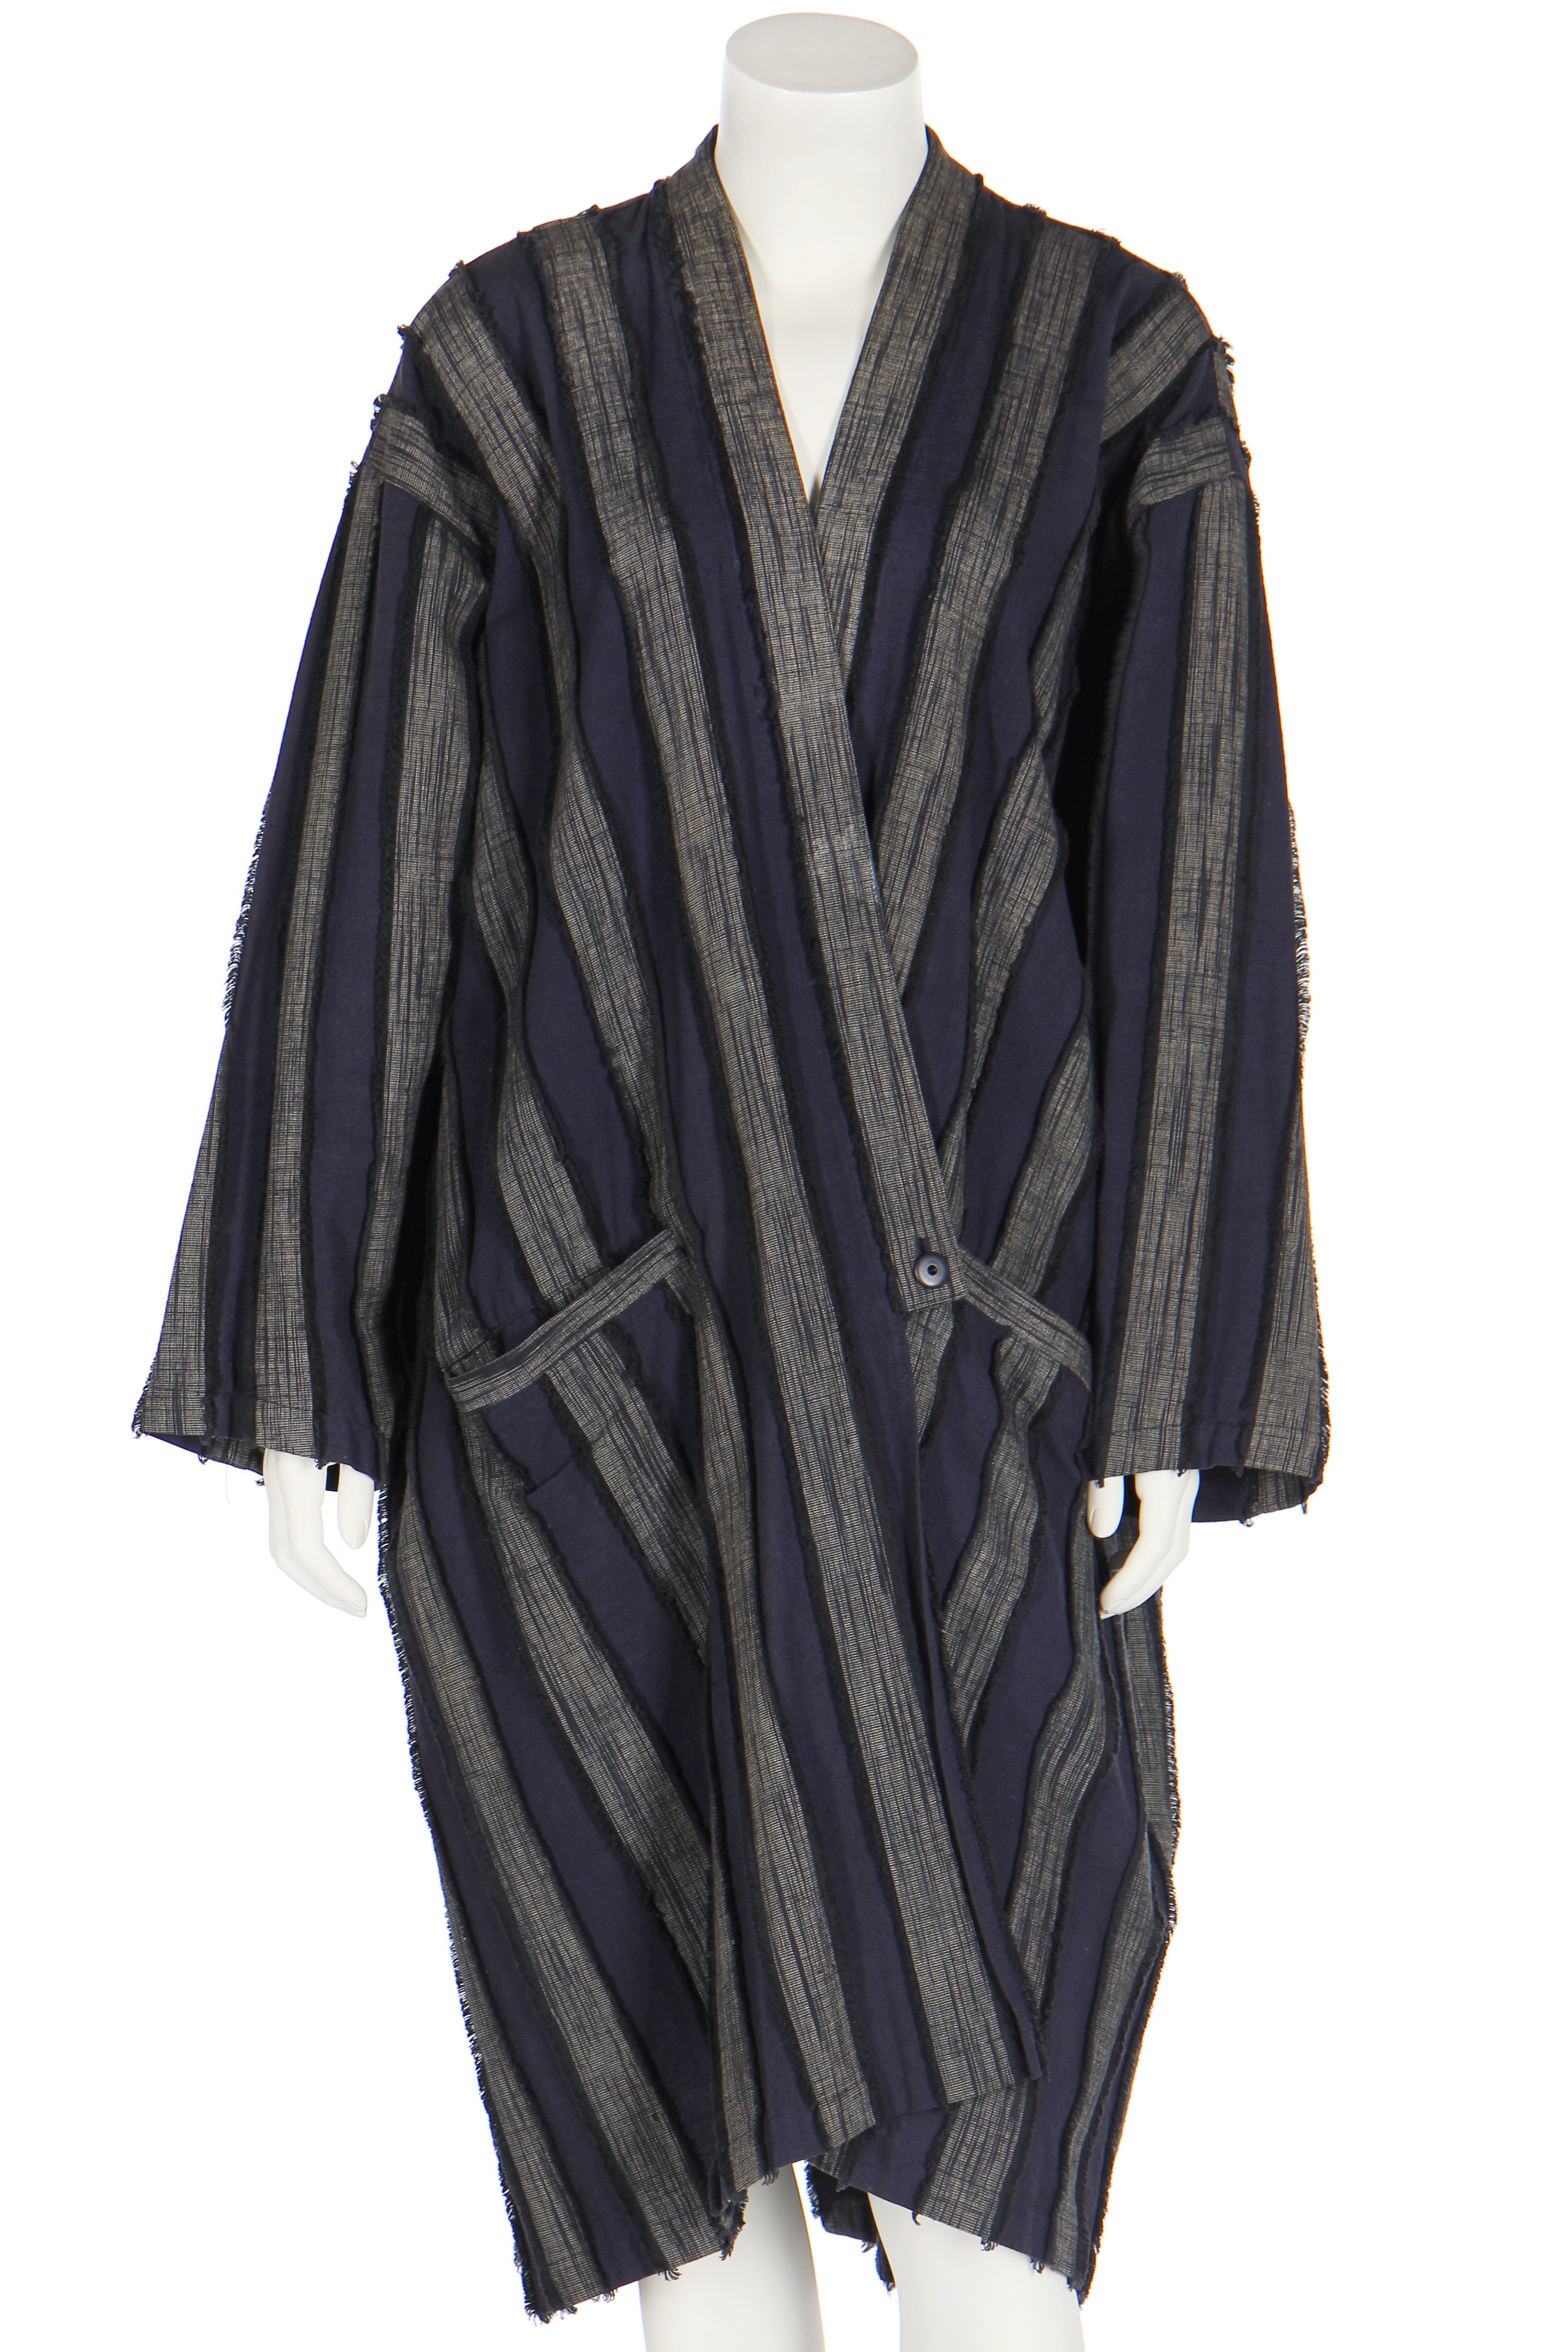 Lot 475 - An Issey Miyake textured oversized cotton